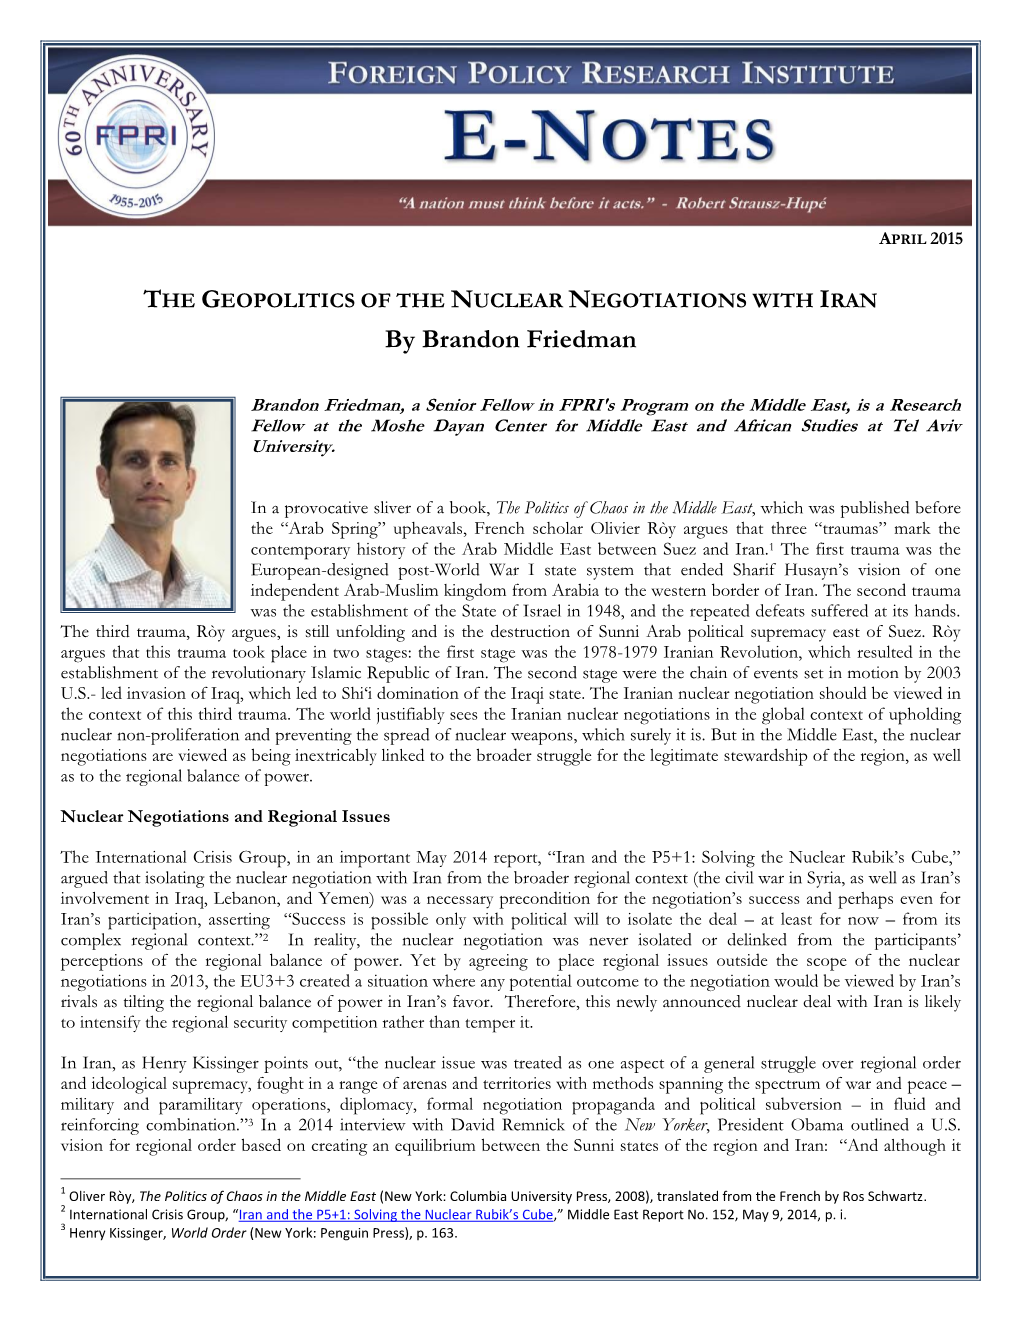 THE GEOPOLITICS of the NUCLEAR NEGOTIATIONS with IRAN by Brandon Friedman